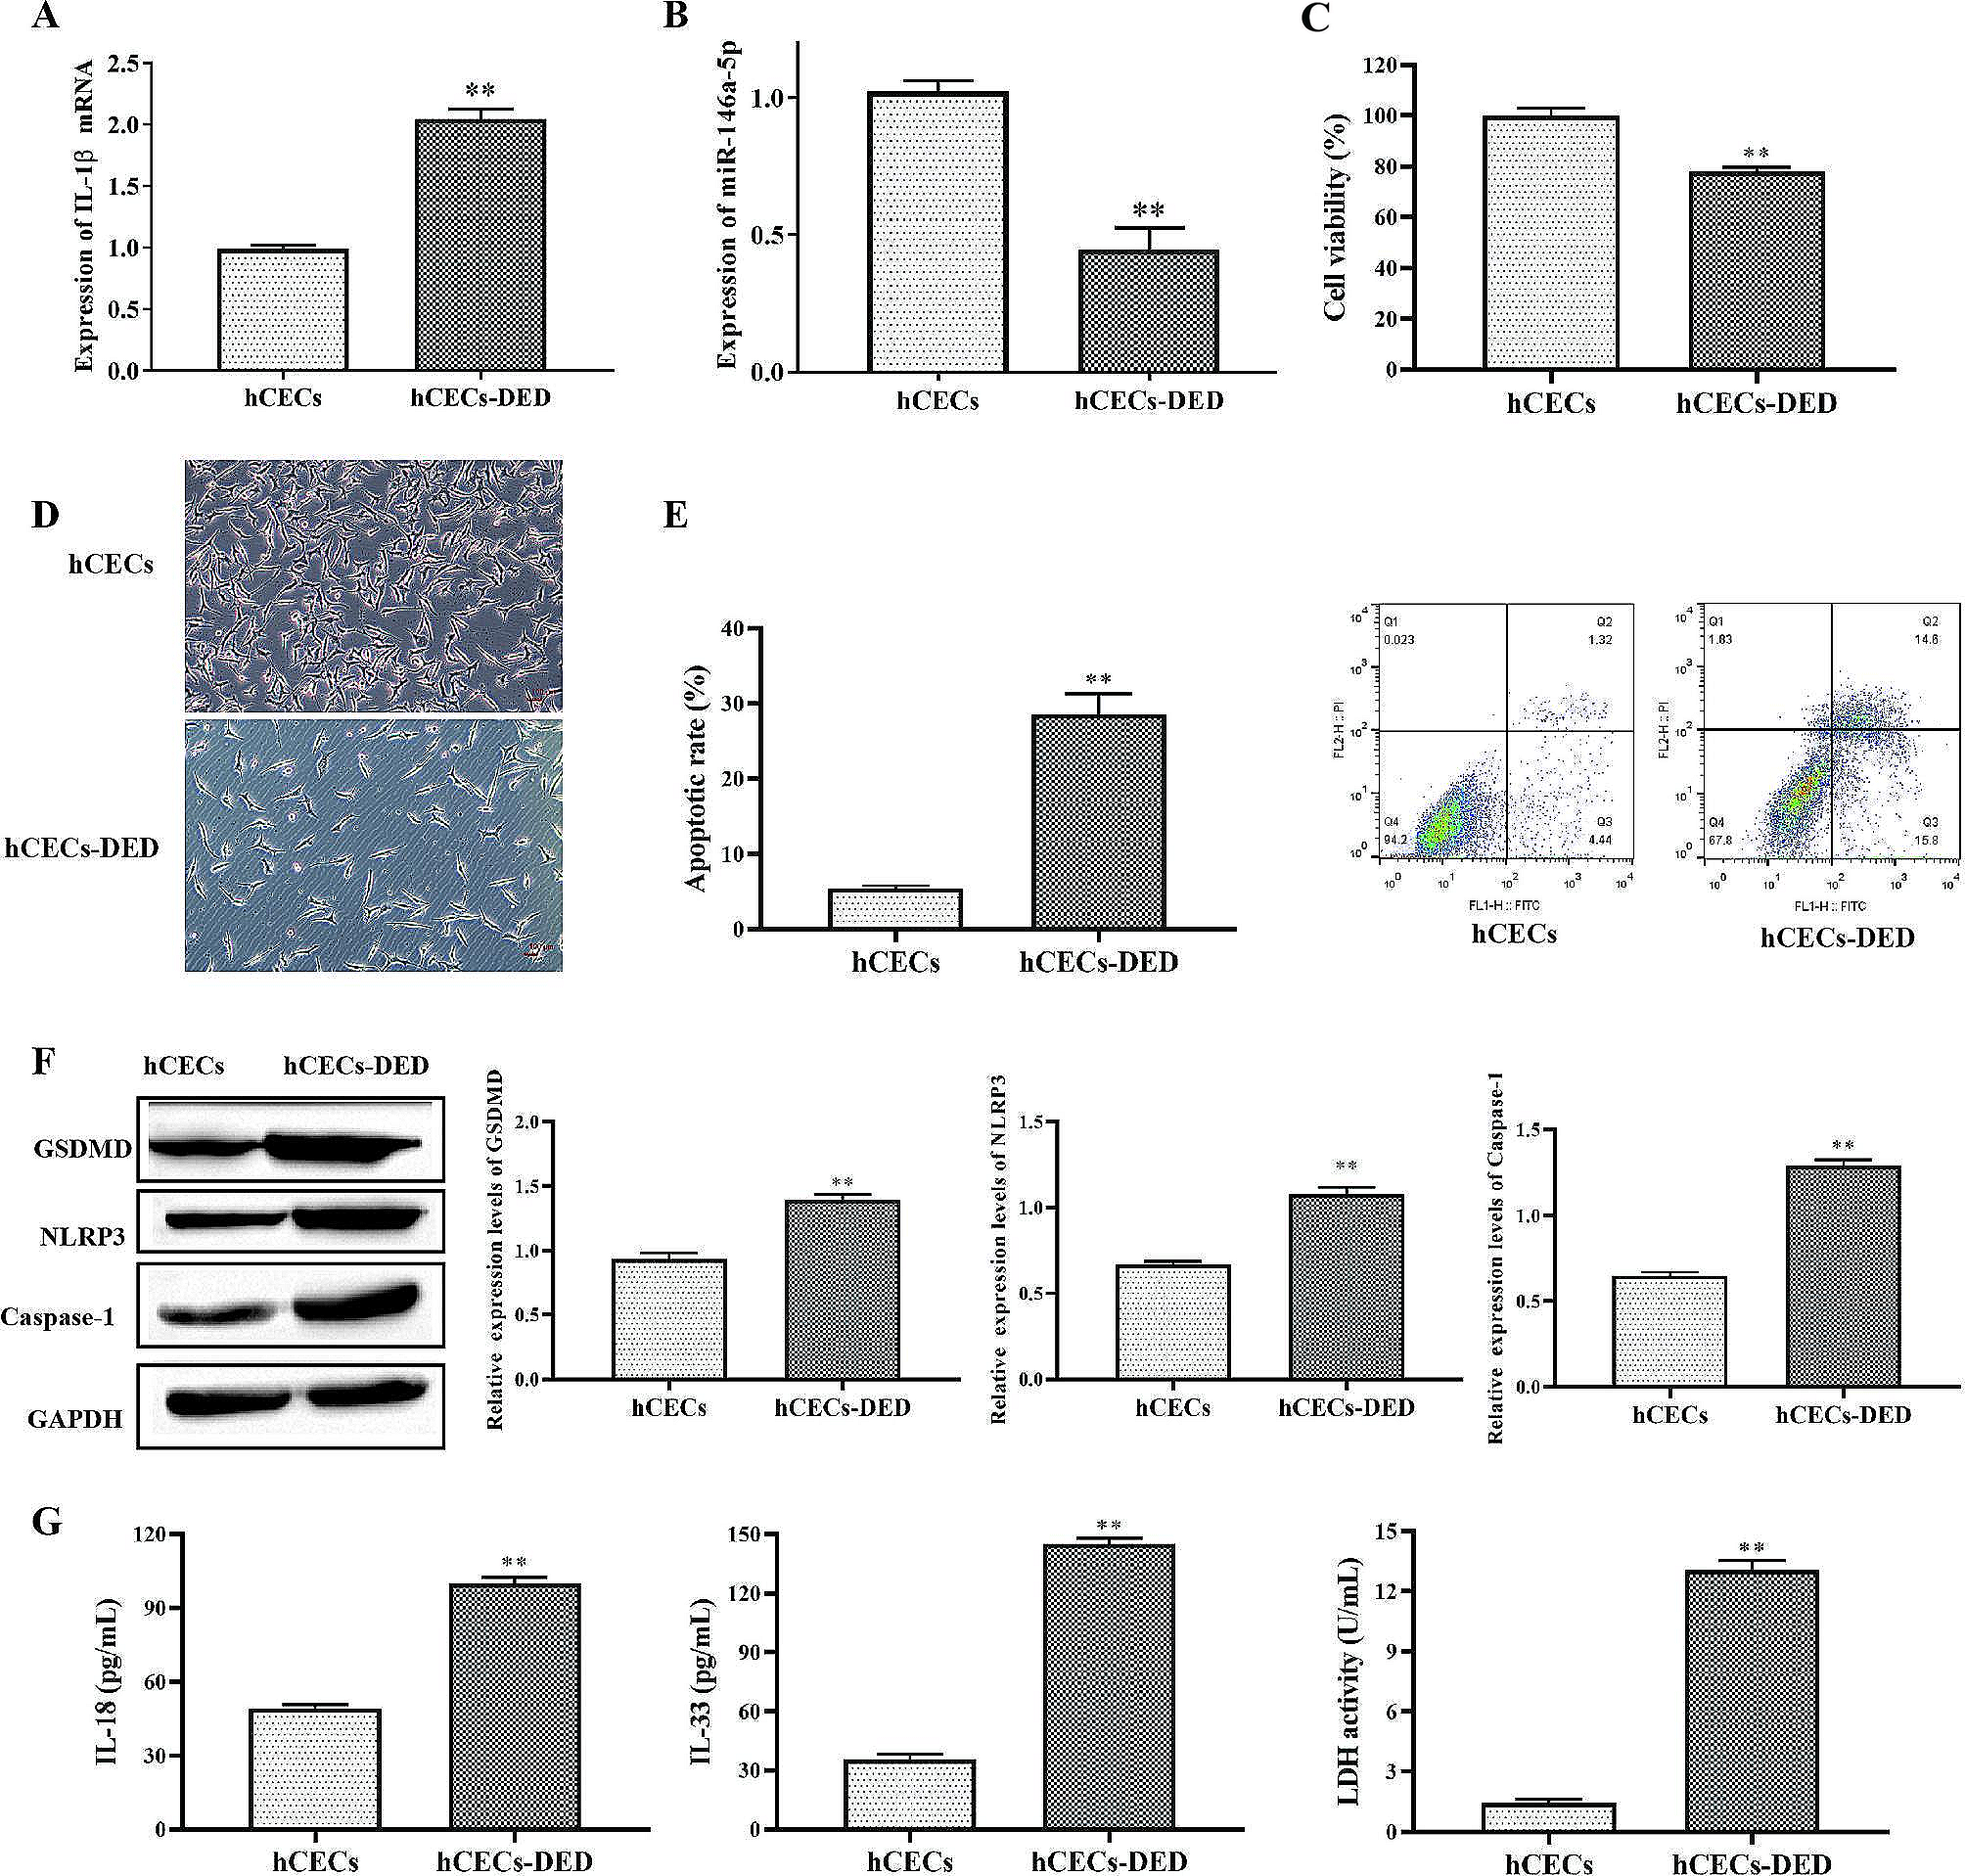 IL-1β induced down-regulation of miR-146a-5p promoted pyroptosis and apoptosis of corneal epithelial cell in dry eye disease through targeting STAT3